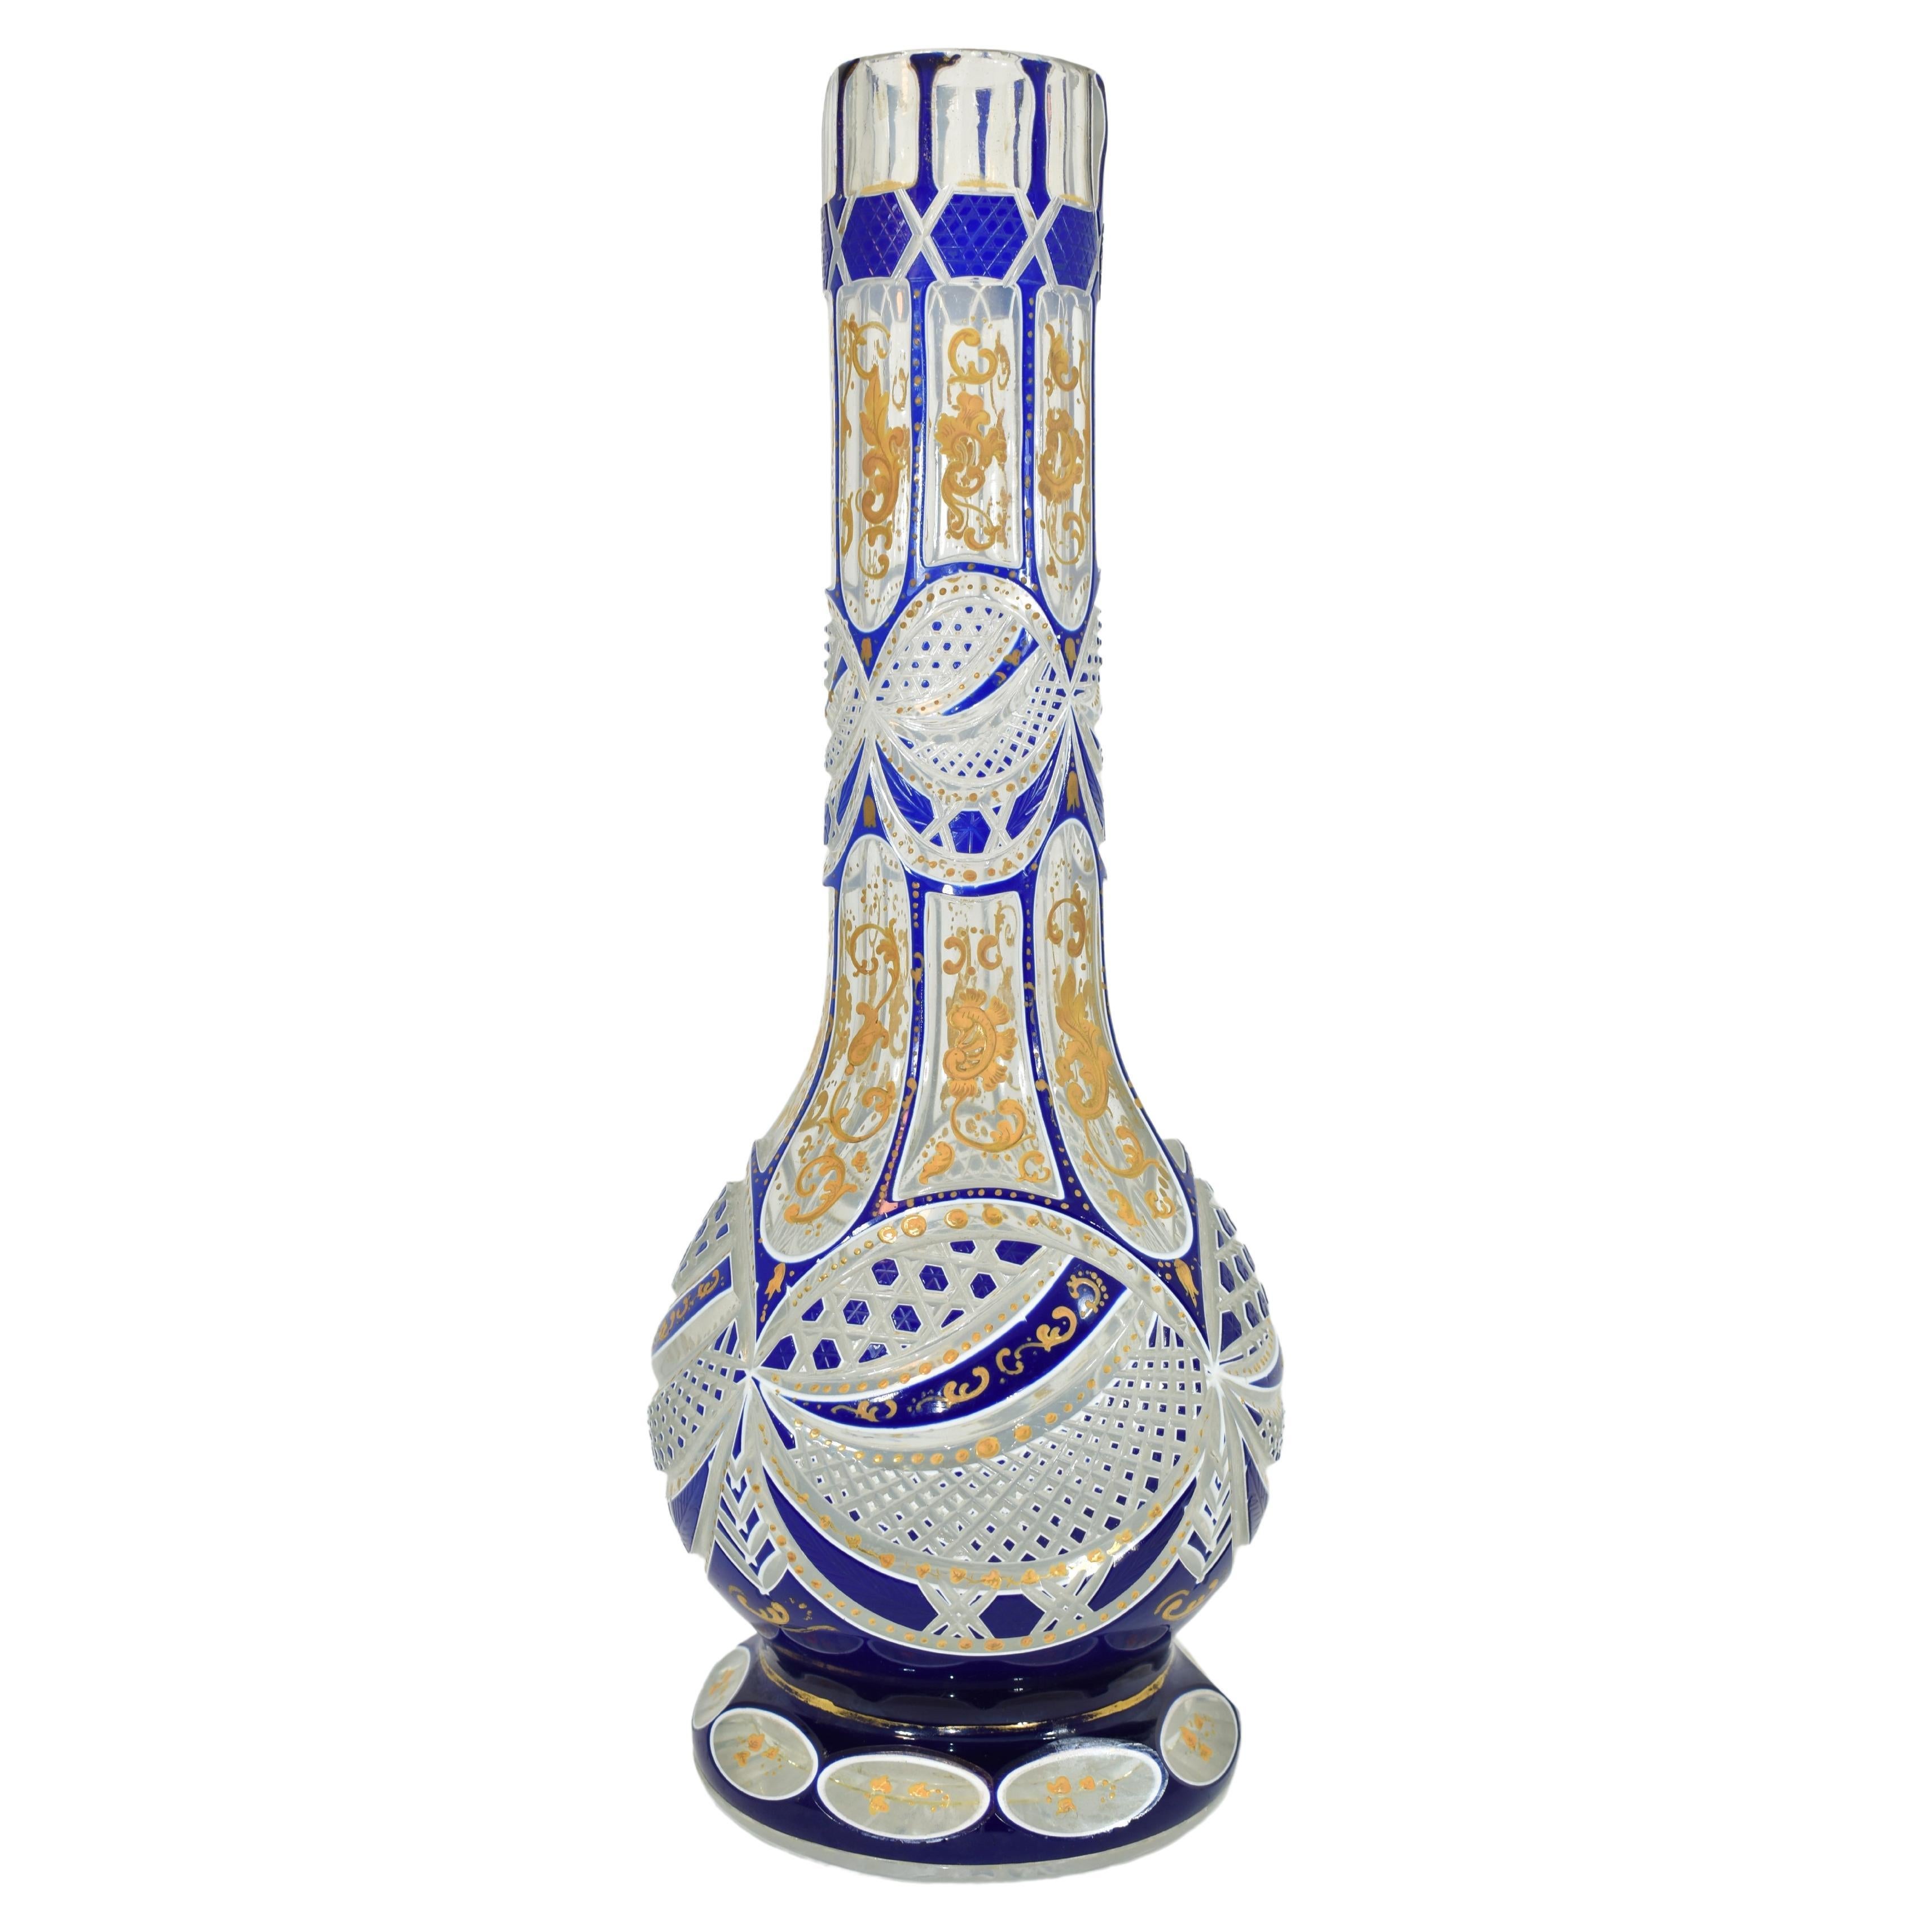 Large antique double overlay glass hookah base (huqqa)
Bohemia, 19th century
Glass richly cut in various shapes and decorated all around with gilded enamel
Made for the Islamic market (Ottoman or Persian)

Height (32 cm)
Diameter (12.5 cm).